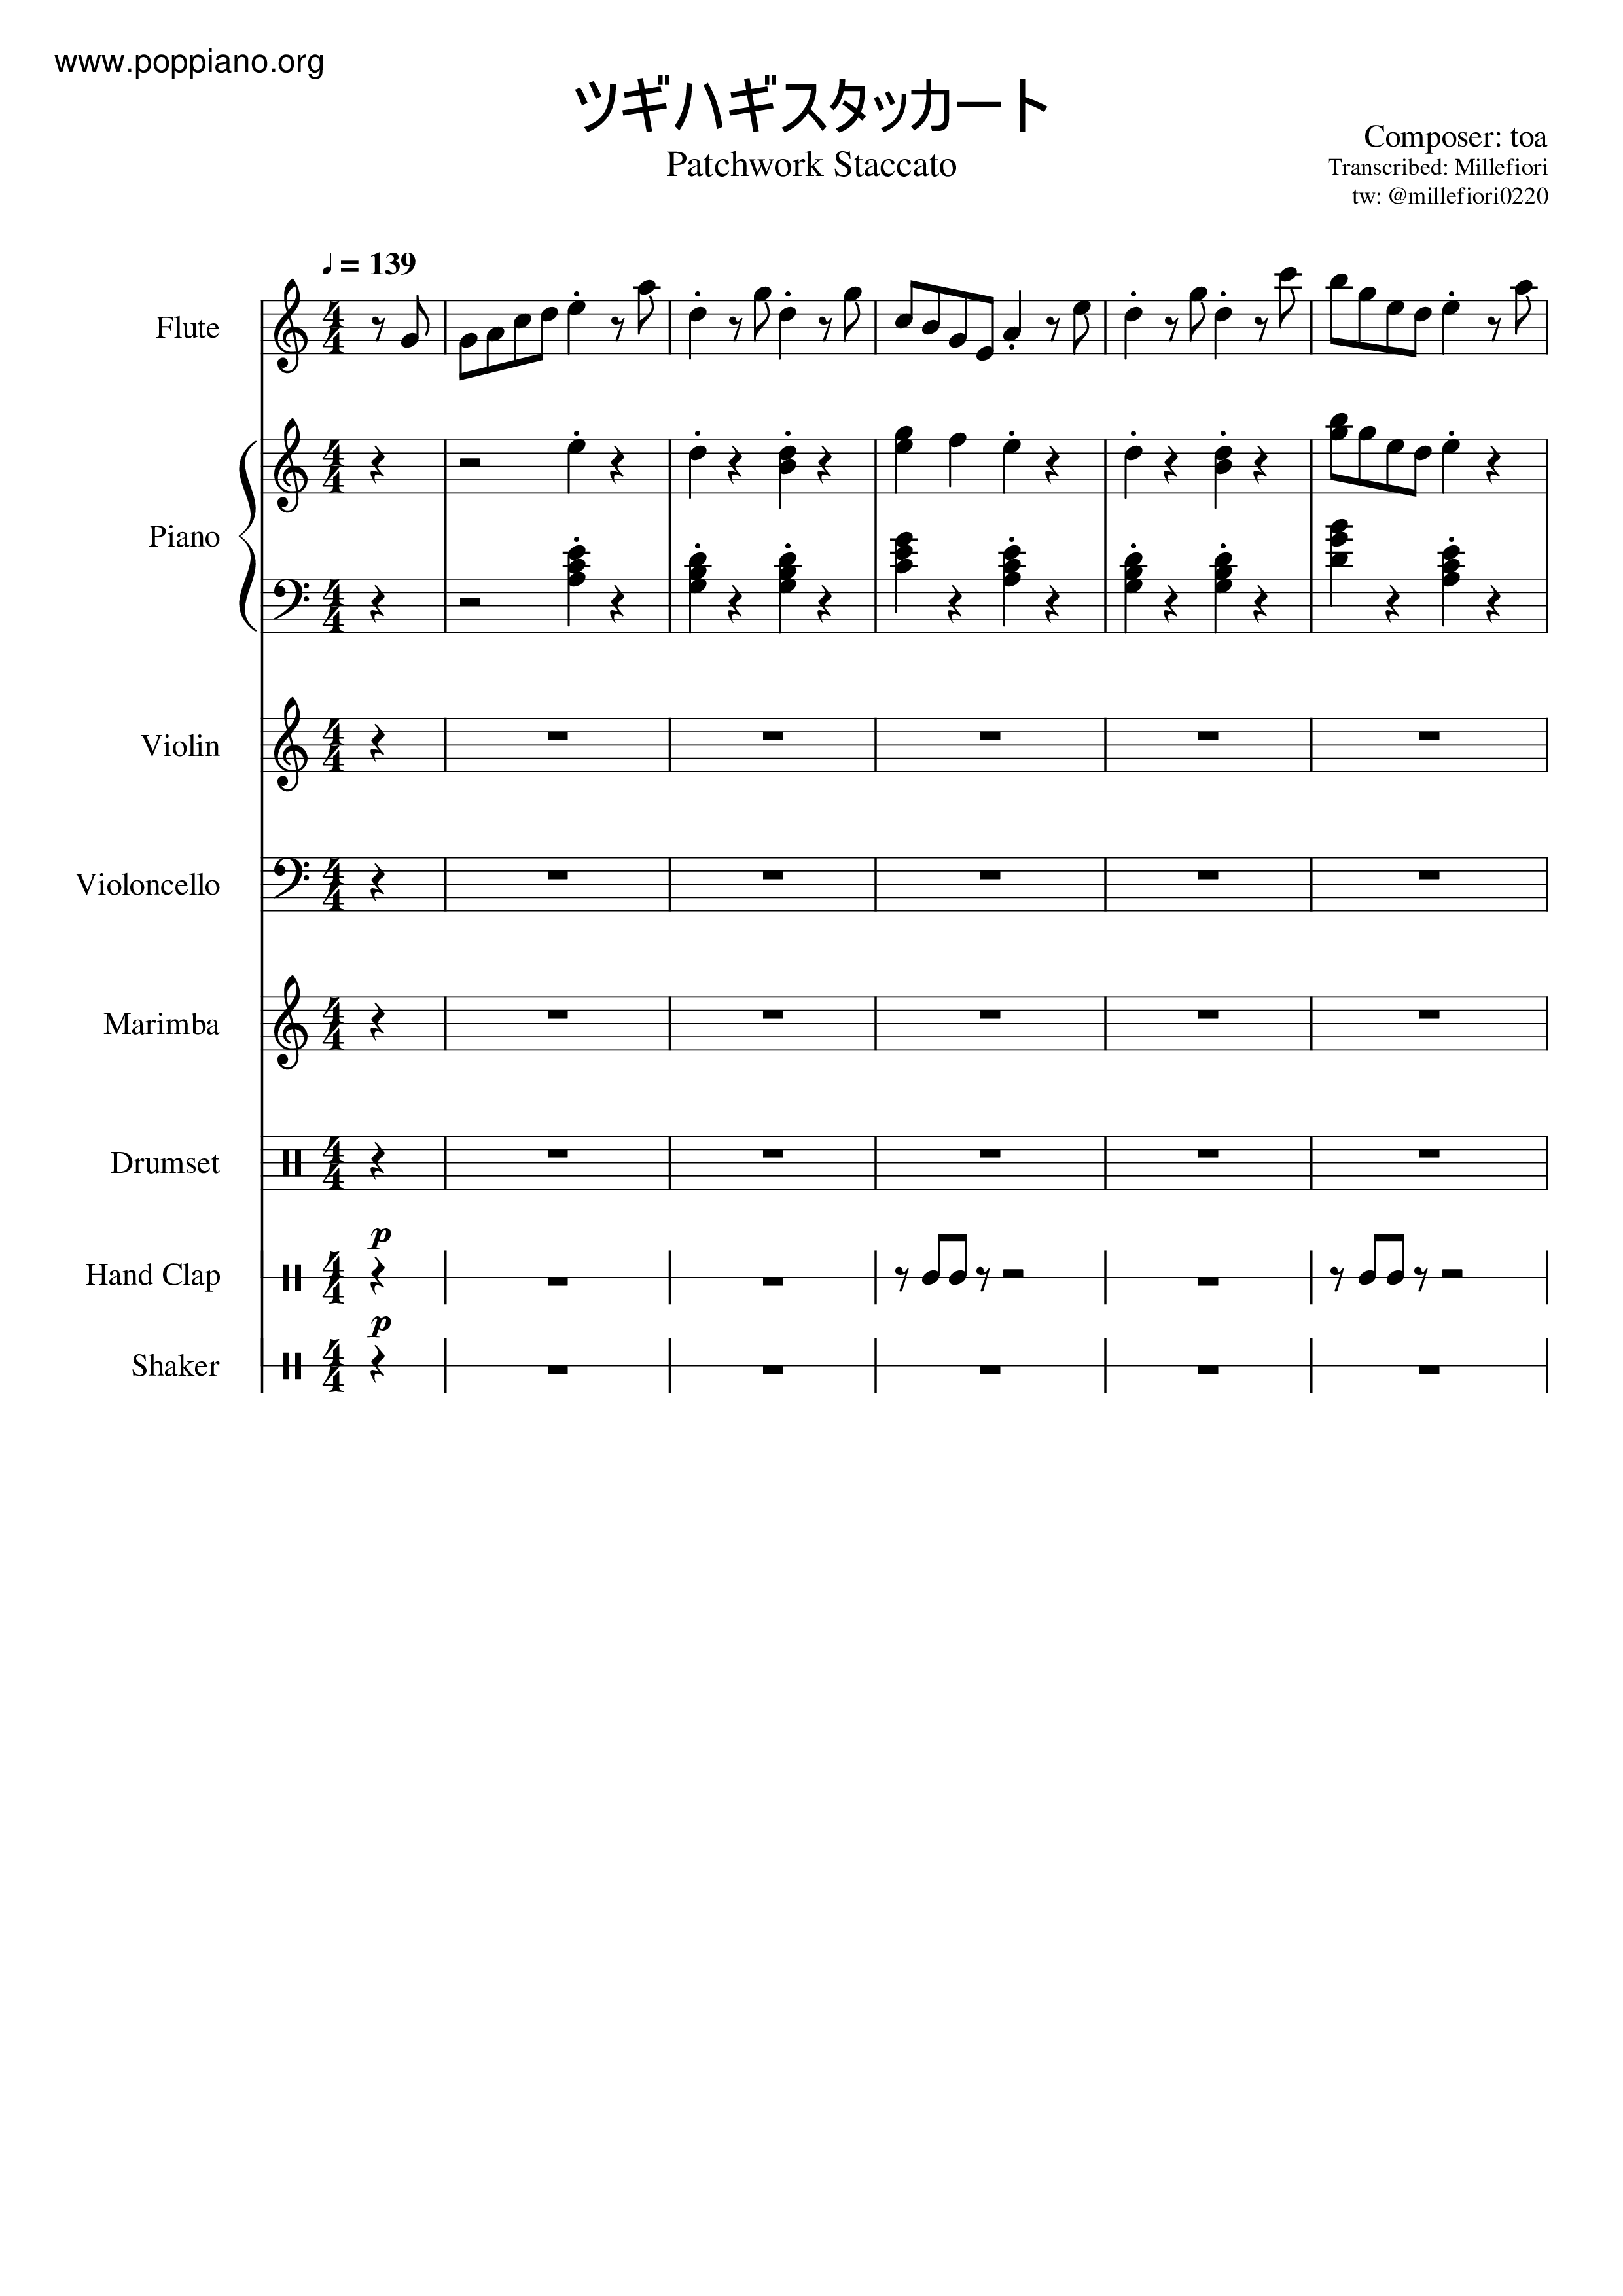 Toa - Patchwork Staccato Score